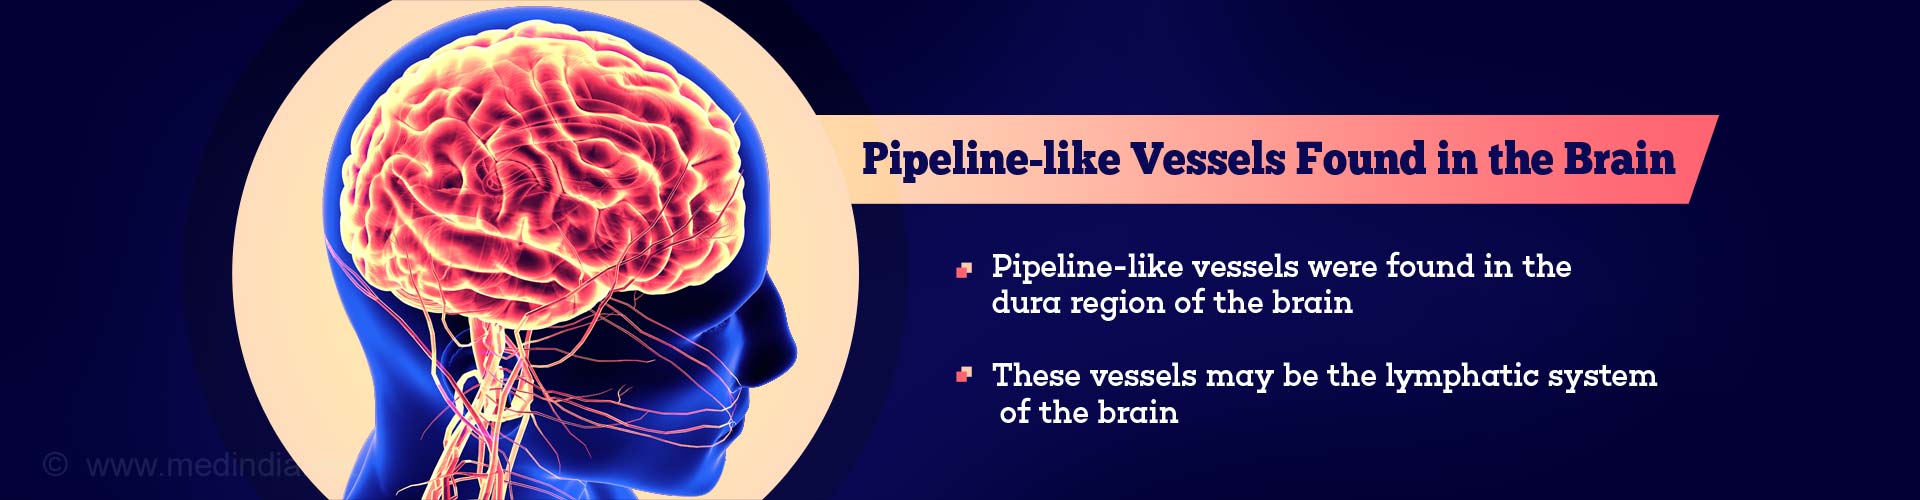 Pipeline-like Vessels Found in the Brain
- Pipeline-like vessels were found in the dura region of he brain
- These vessels may be the lymphatic system of the brain